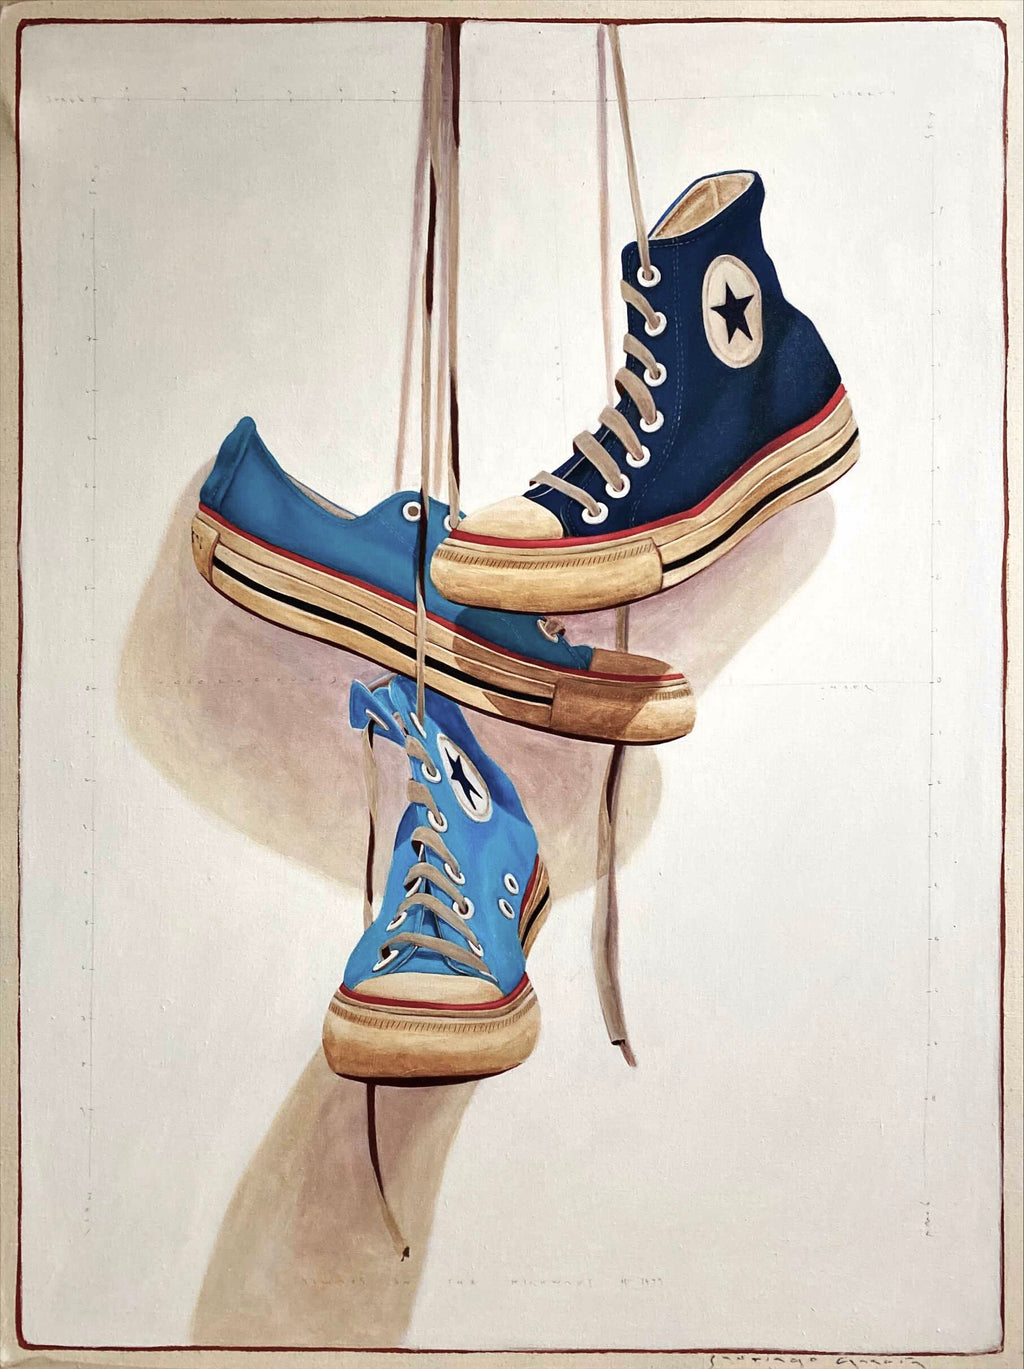 oil painting of converse sneakers in three shades of blue hanging by laces 